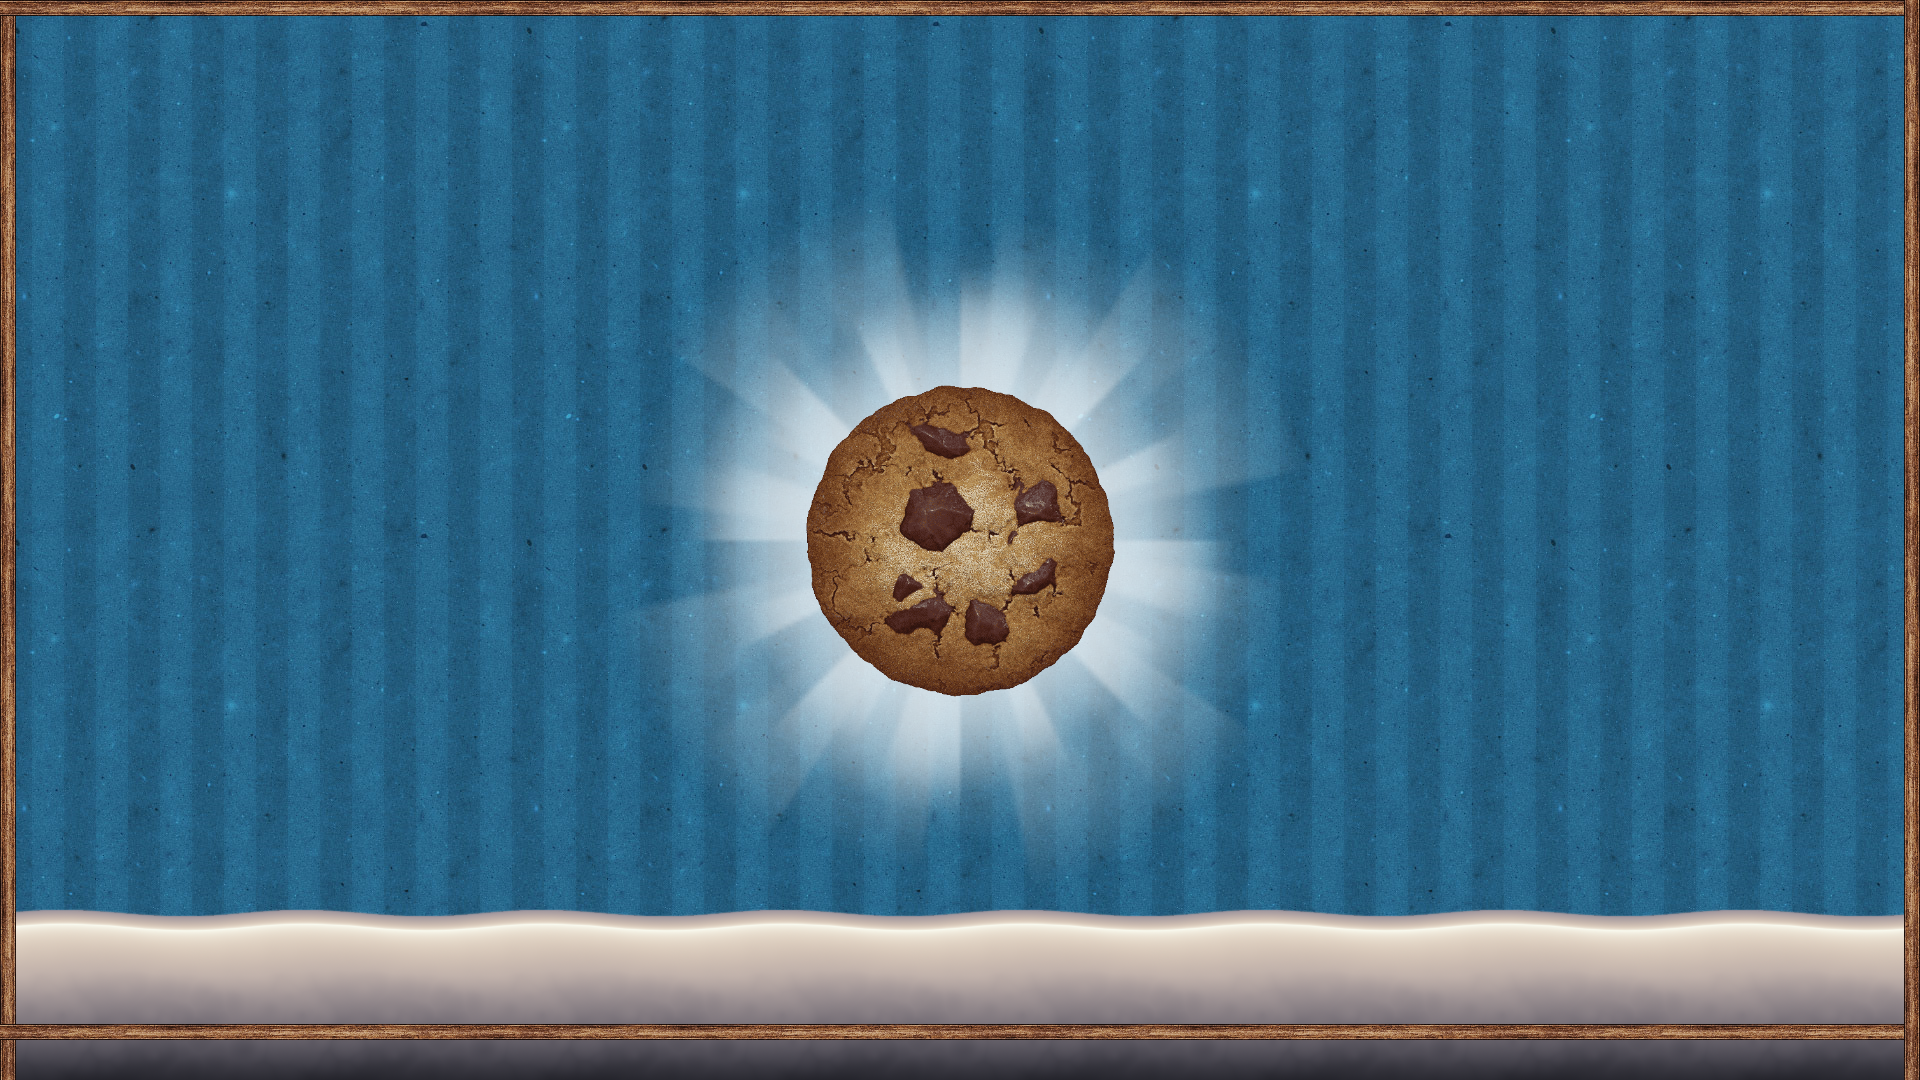 Cookie Clicker Unblocked - Play Online Cookie Clicker Unblocked